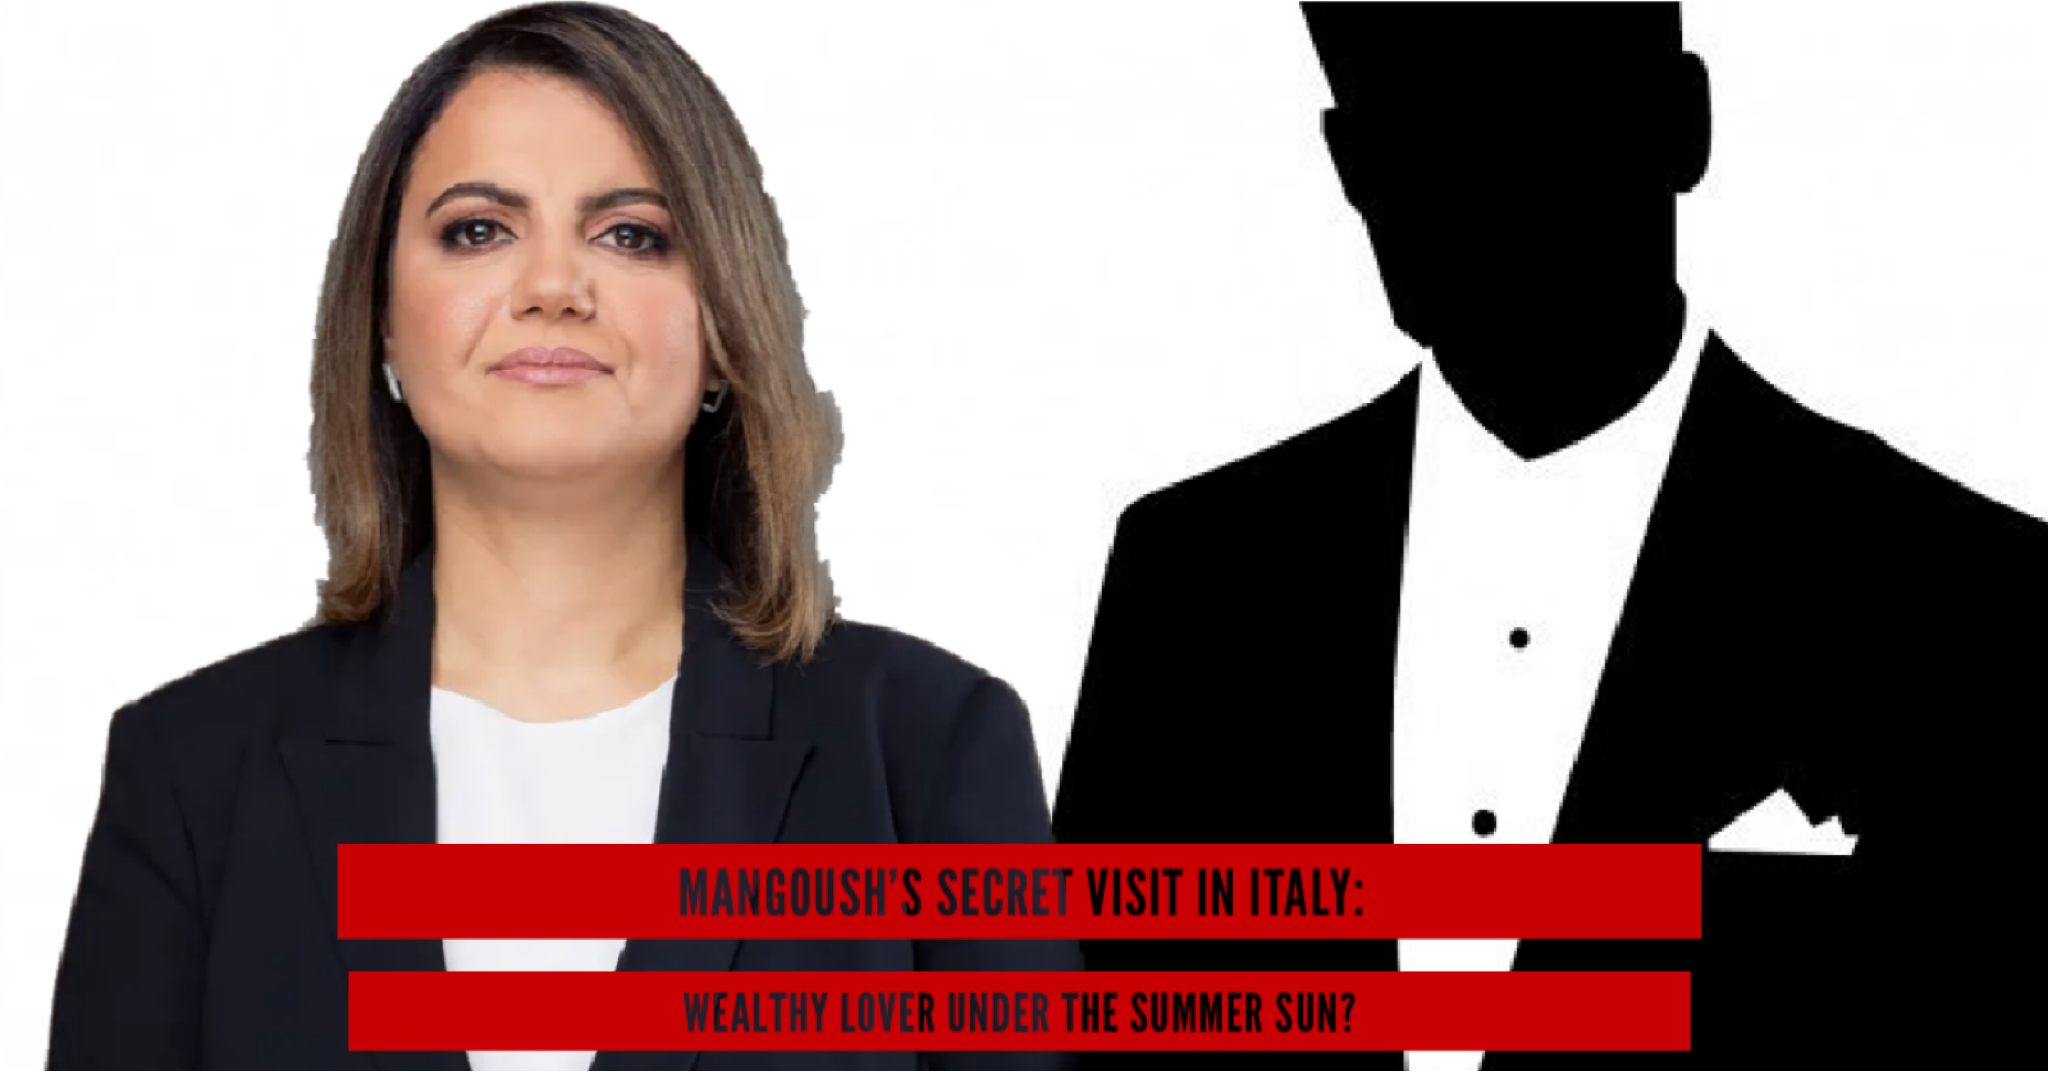 Libyan Foreign Minister Najla al-Mangoush’s secret visit in Italy: wealthy lover under the summer sun?